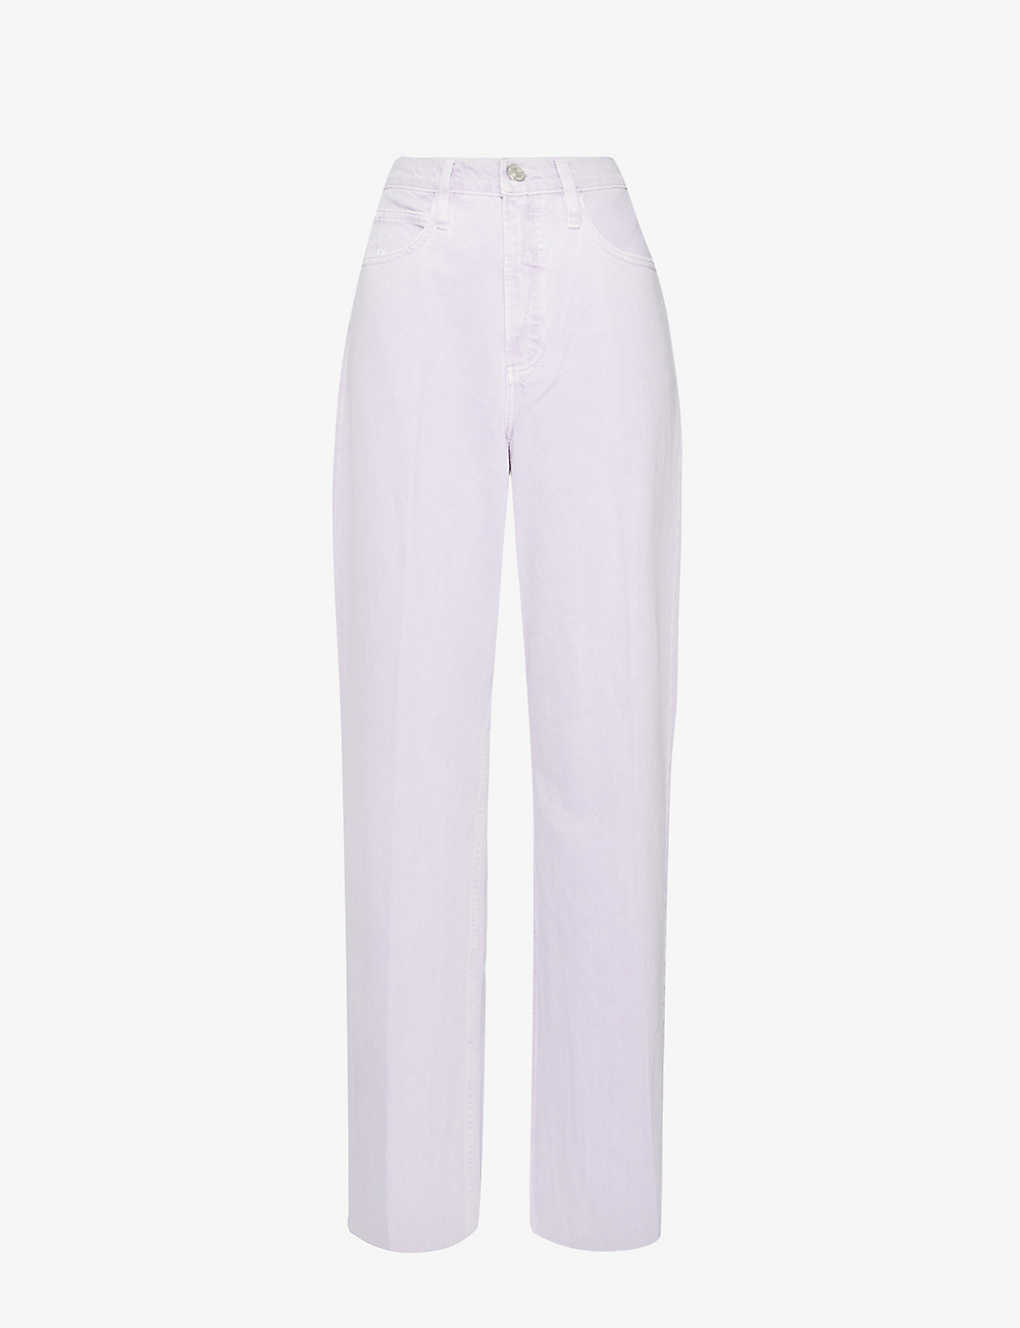 FRAME FRAME WOMEN'S WASHED LILAC LE HIGH ‘N’ TIGHT WIDE-LEG HIGH-RISE JEANS,66647448